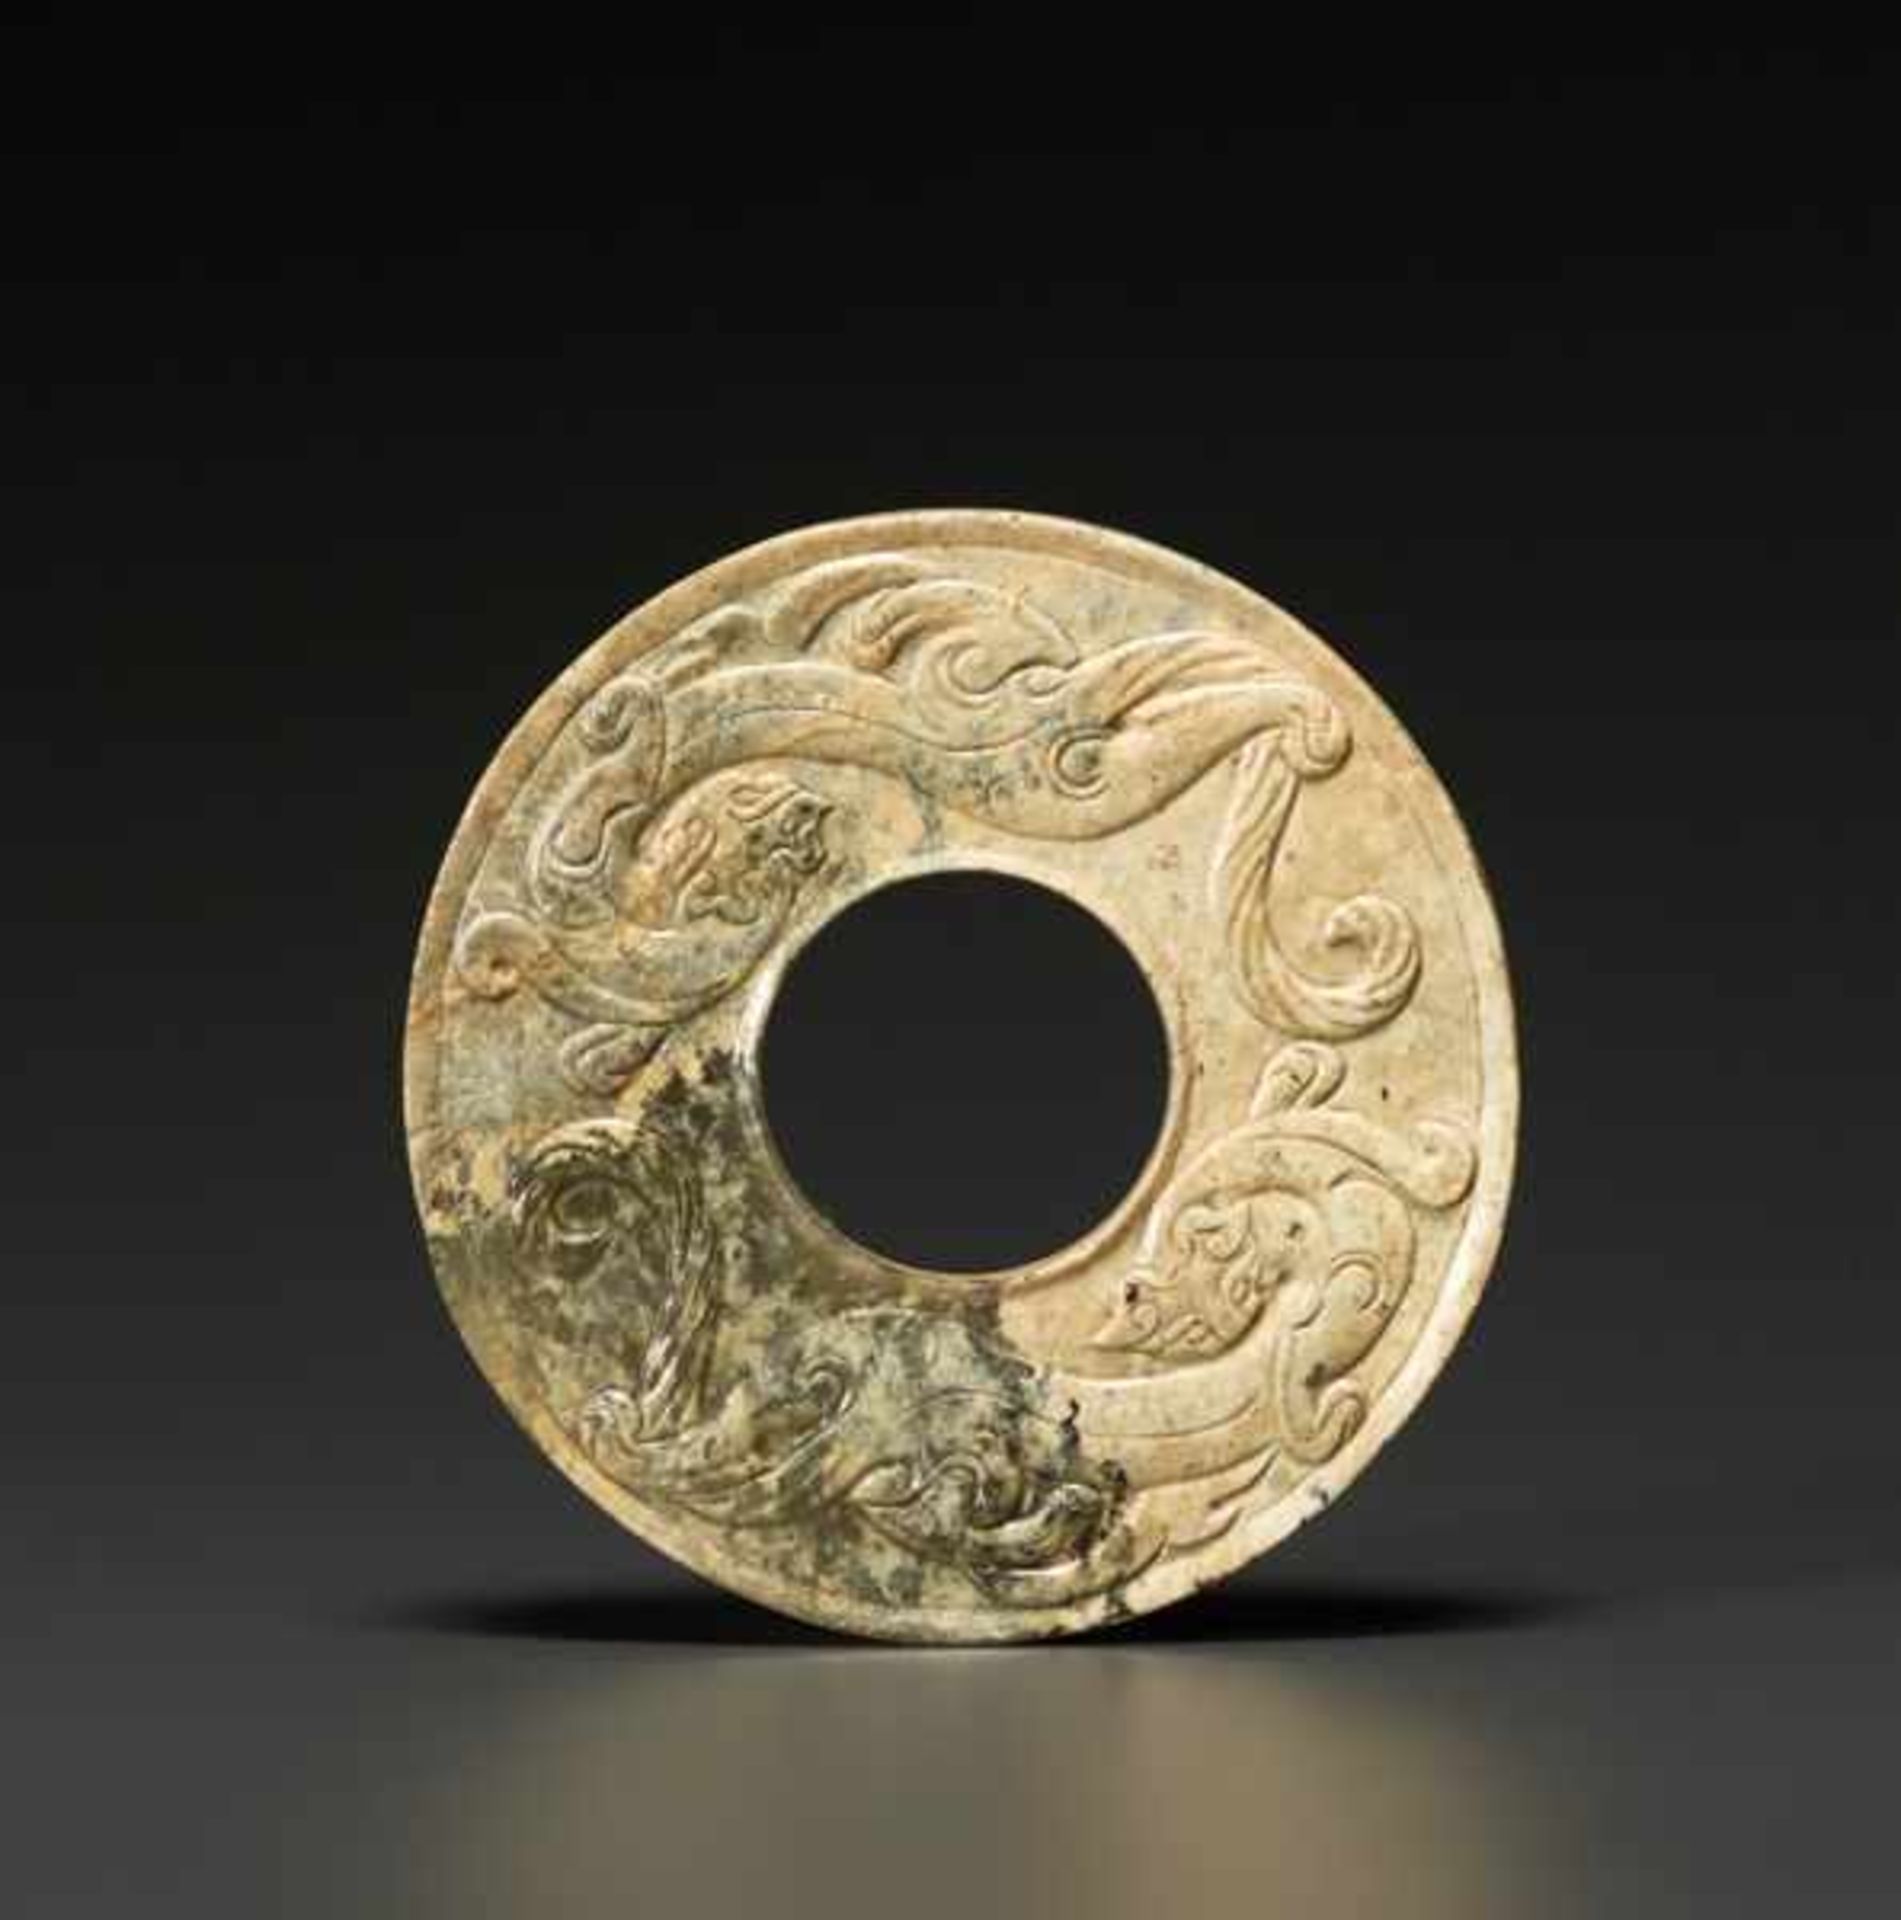 SMALL BI FEATURING DRAGONS Jade. China, Han dynasty, 206 BC - 220 CEA small decorative piece in